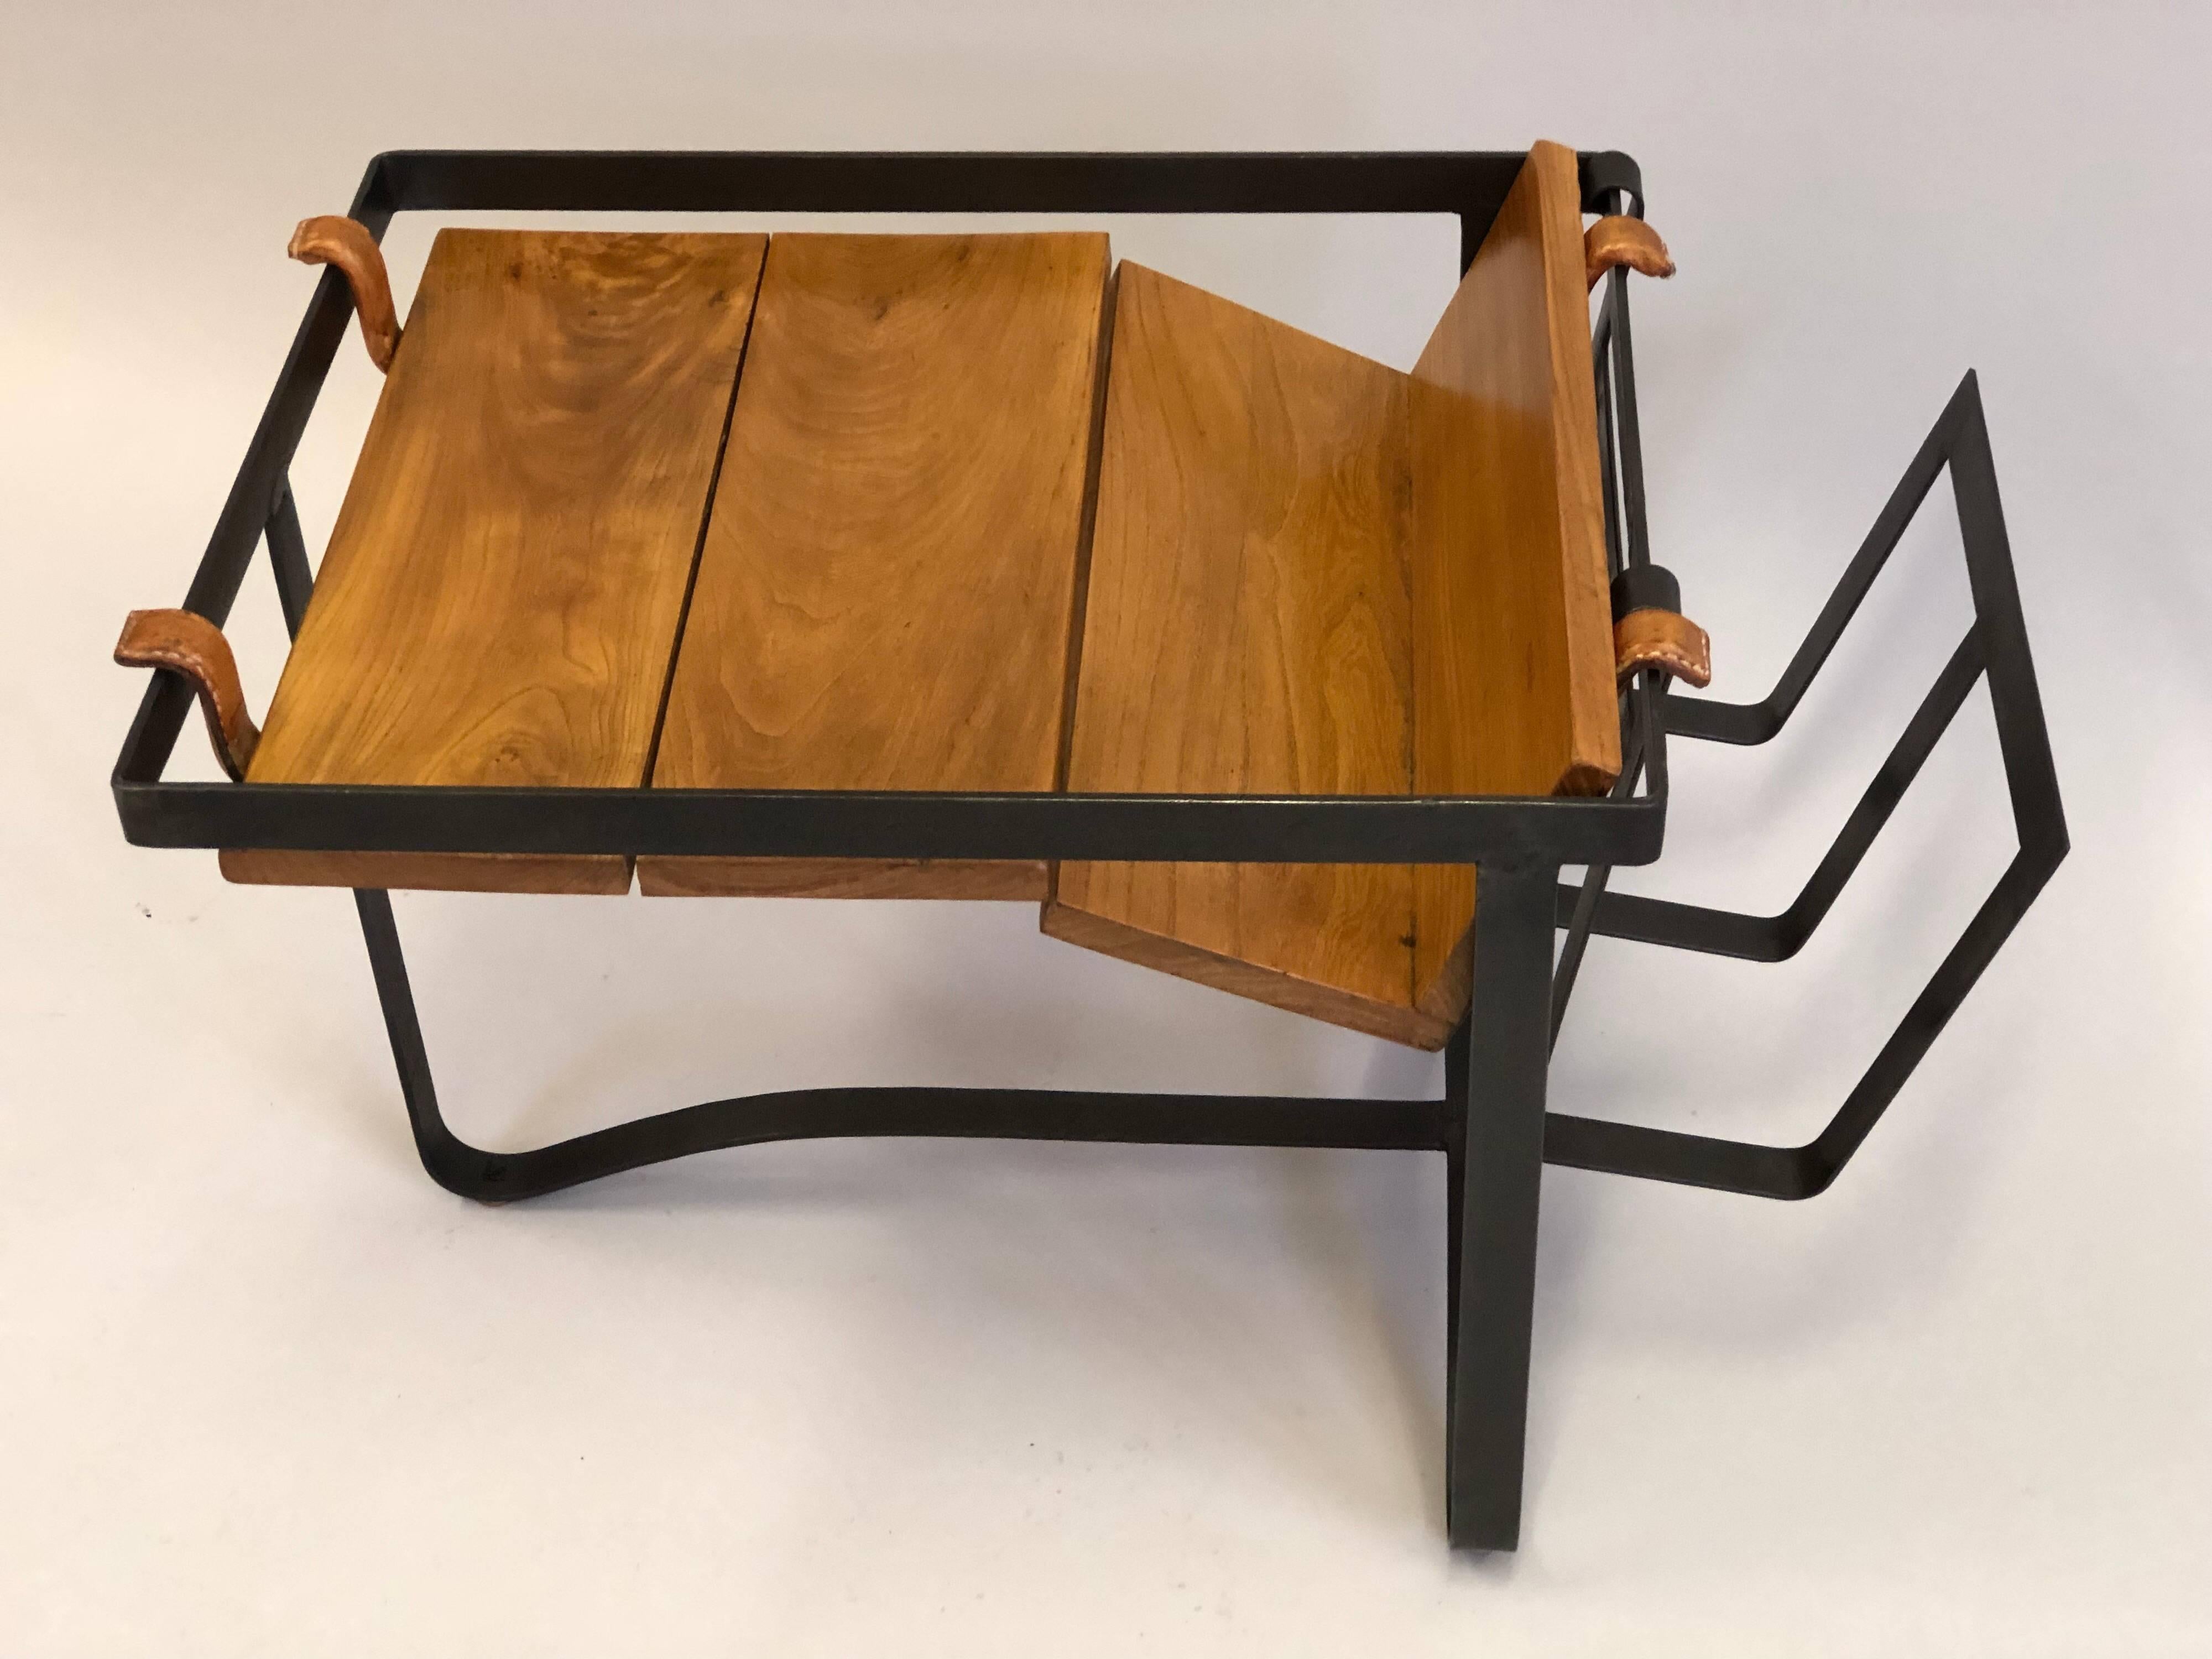 Rare, elegant French Mid-Century Modern side table or magazine rack by Jacques Adnet in wrought iron / steel, wood and leather.

The wrought iron / steel base is tripod in form and originally was covered in leather; a slatted solid wood top is